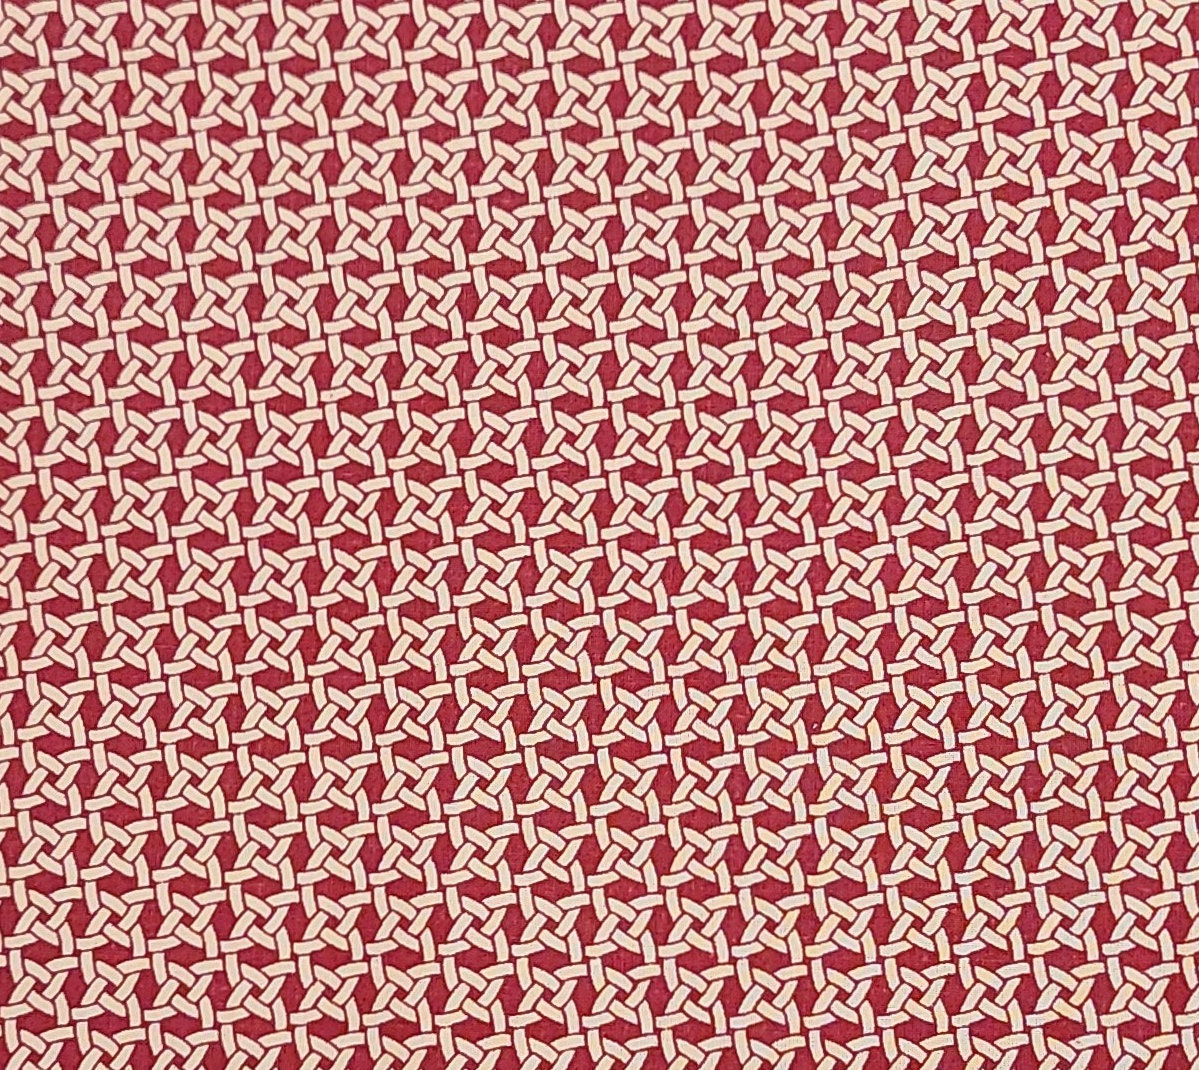 Dark Red and Tan "Chain Link" Pattern Fabric - Selvage to Selvage Print